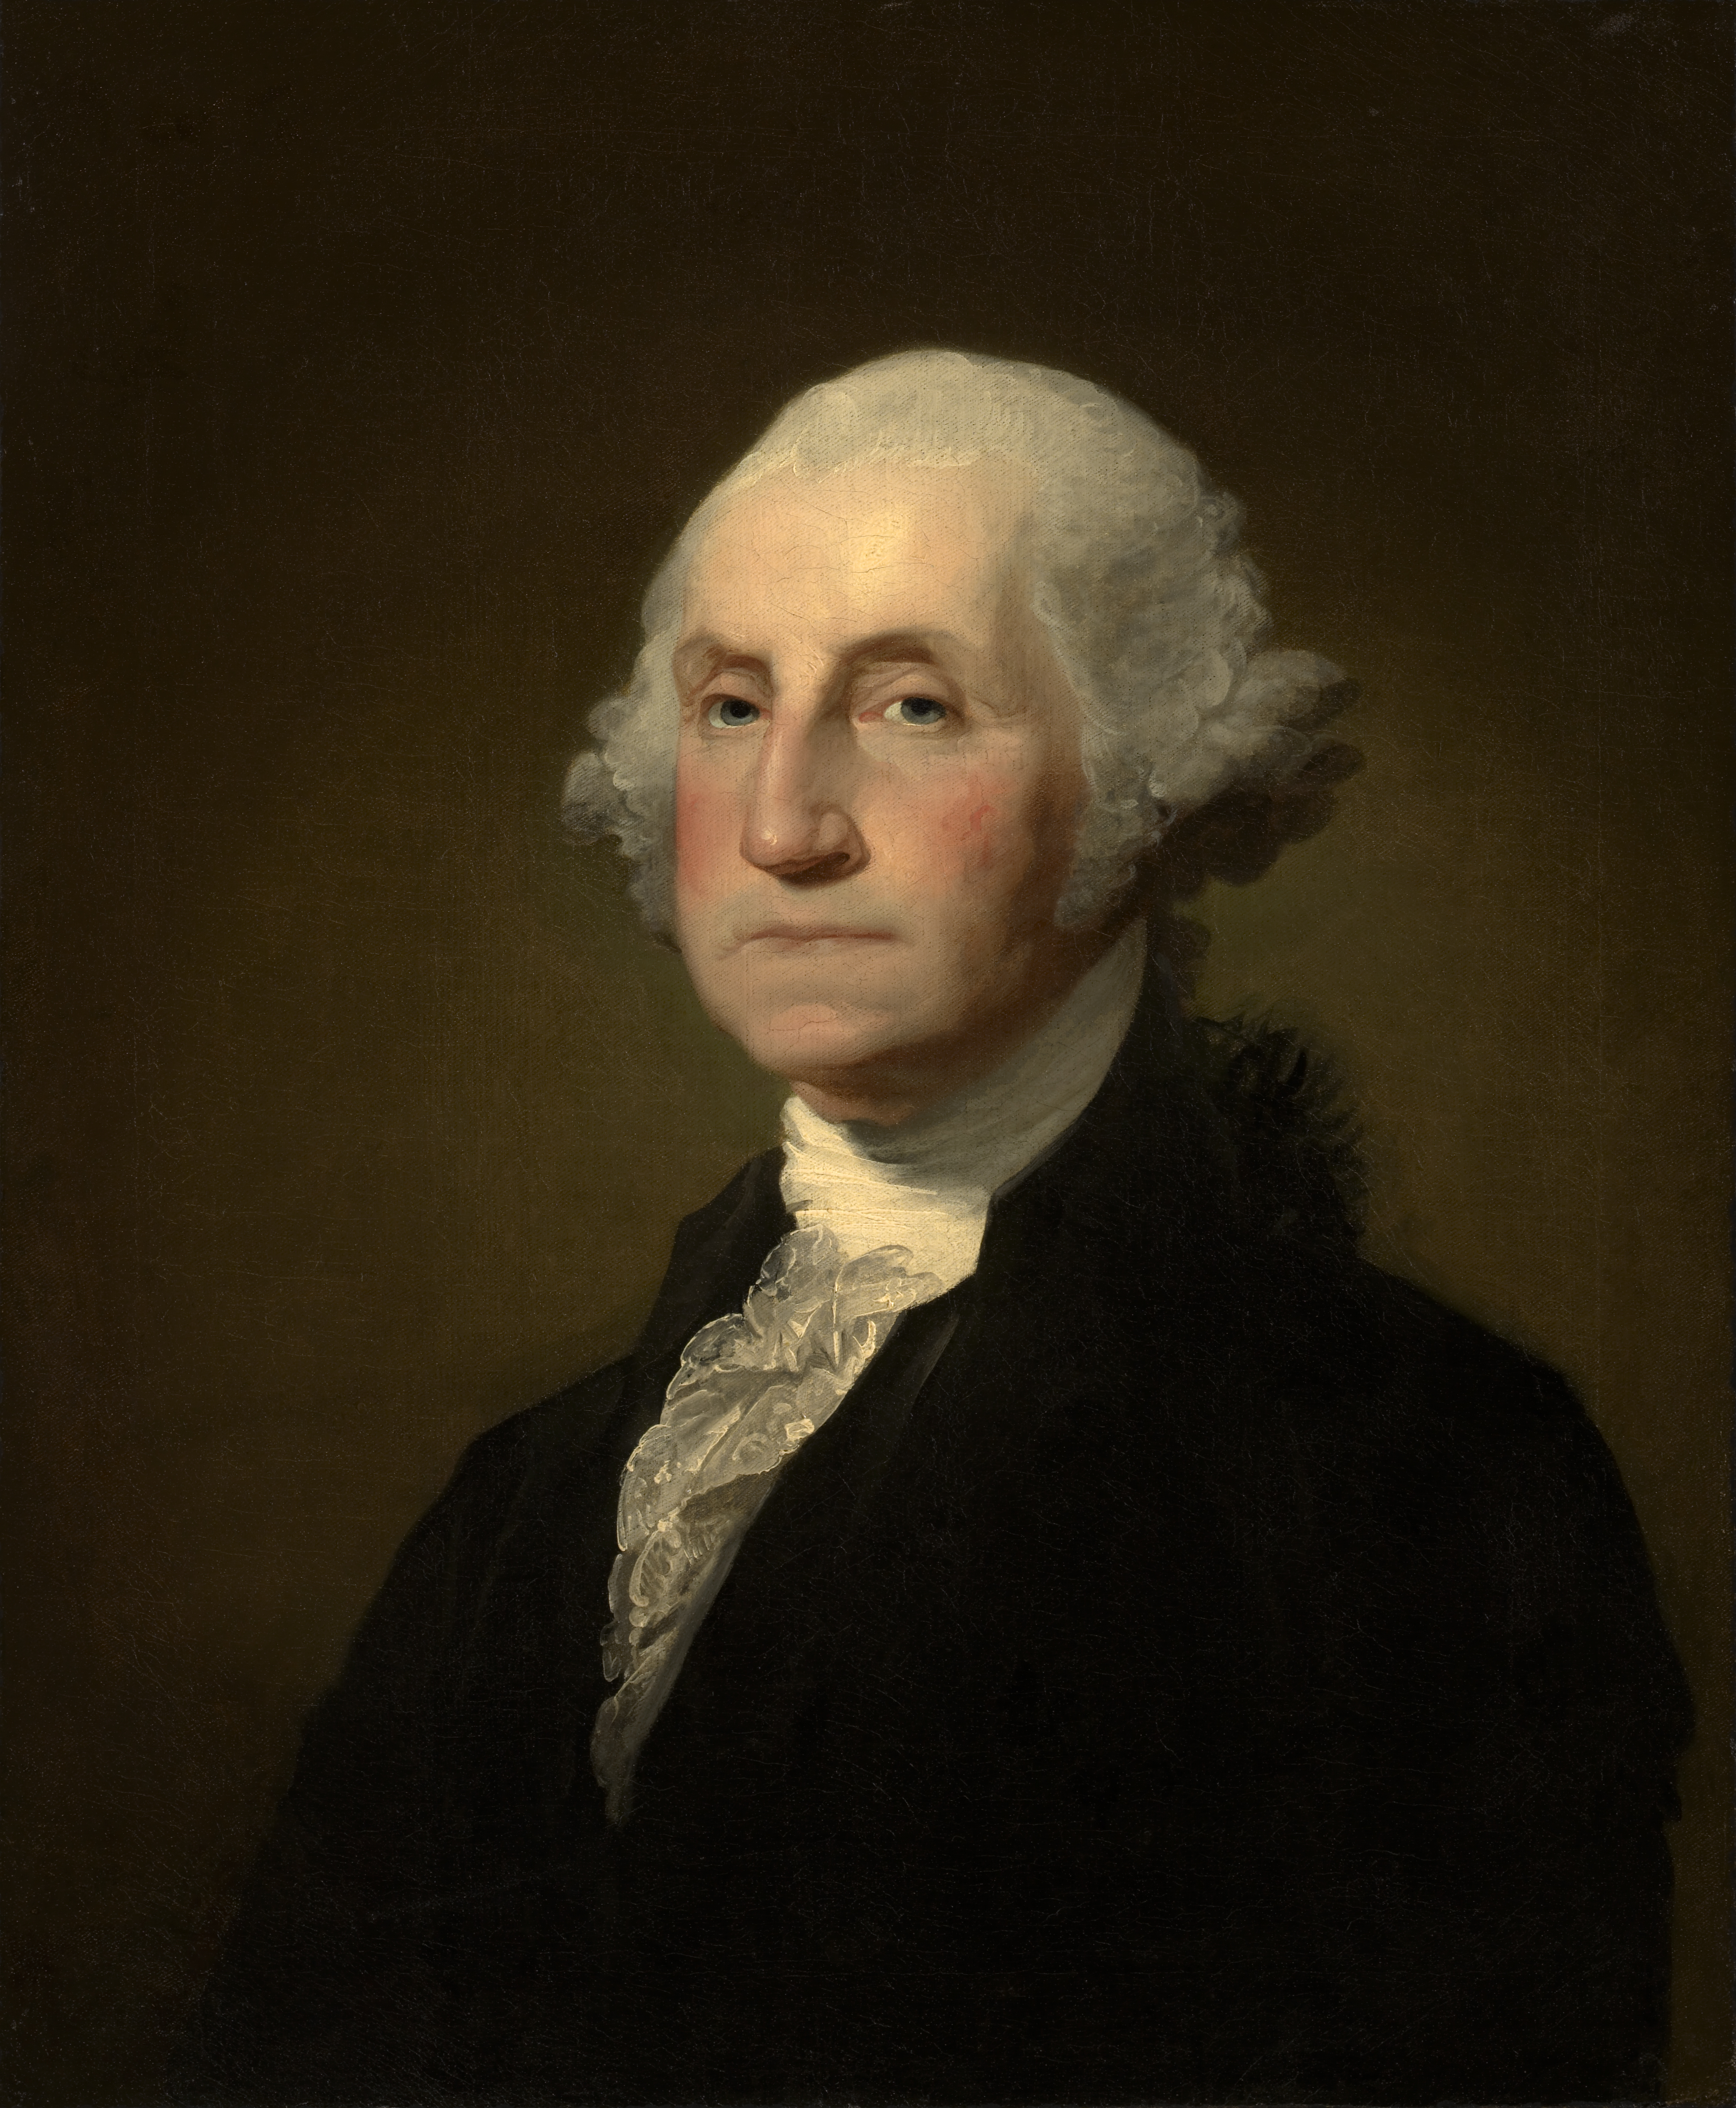 A picture of George Washington